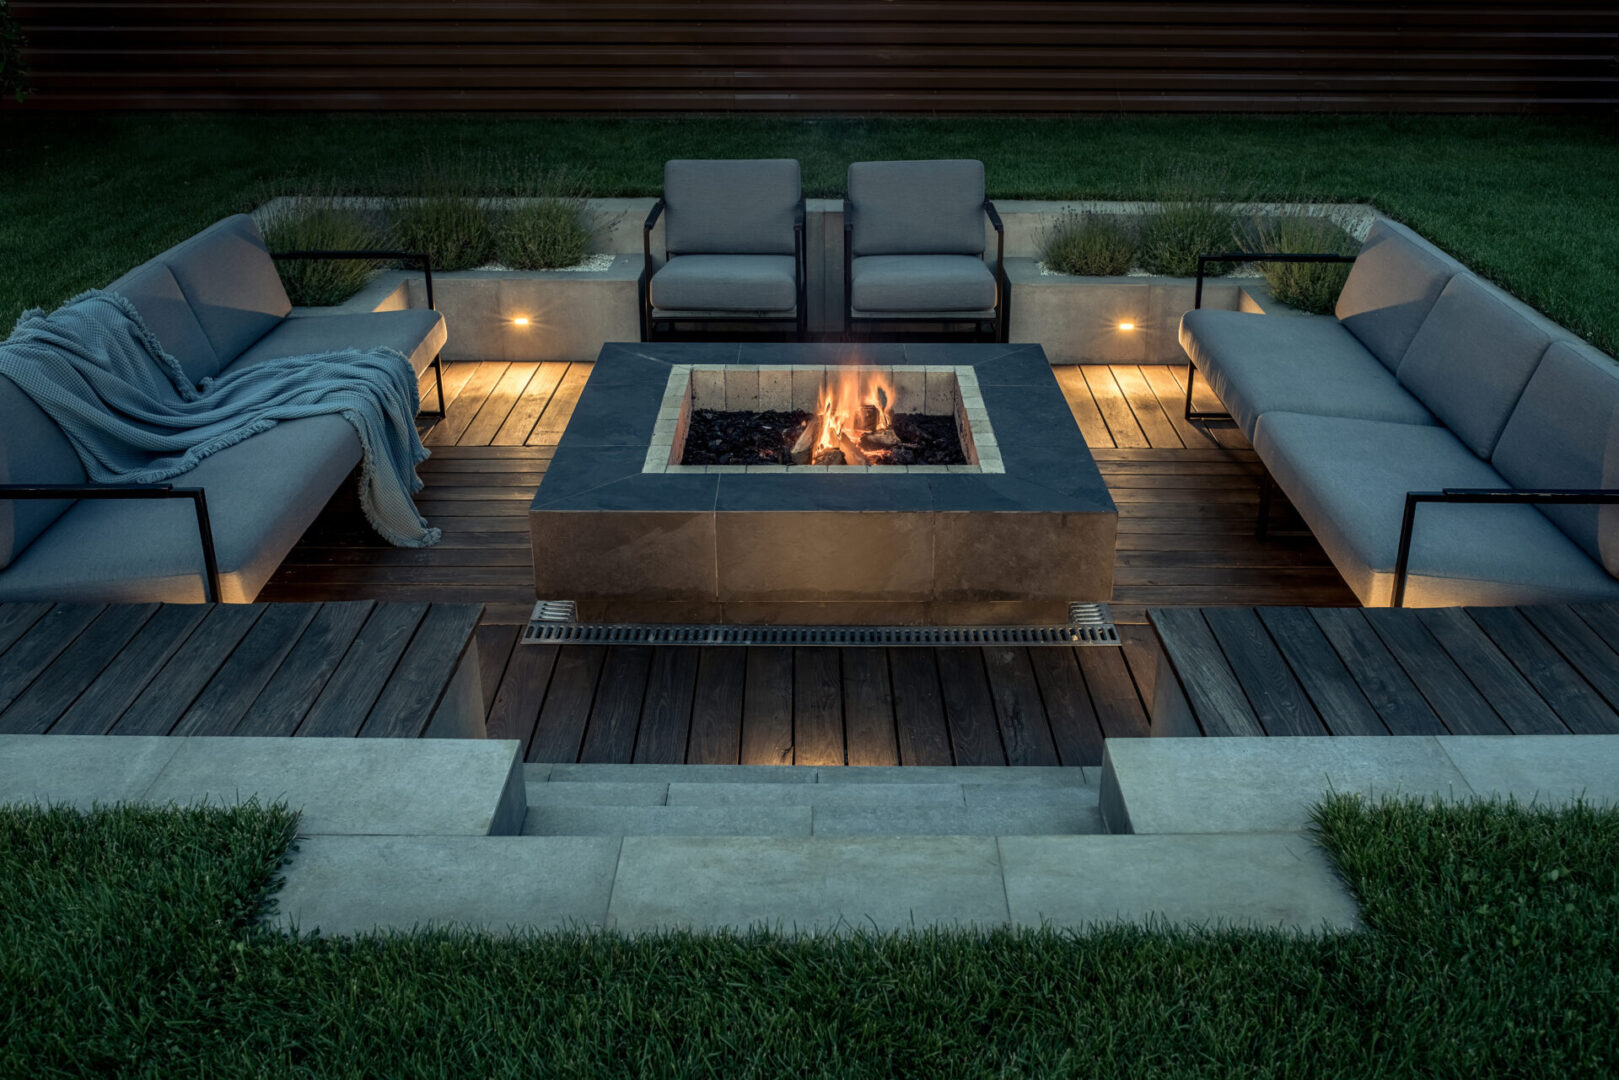 A fire pit in the middle of an outdoor patio.